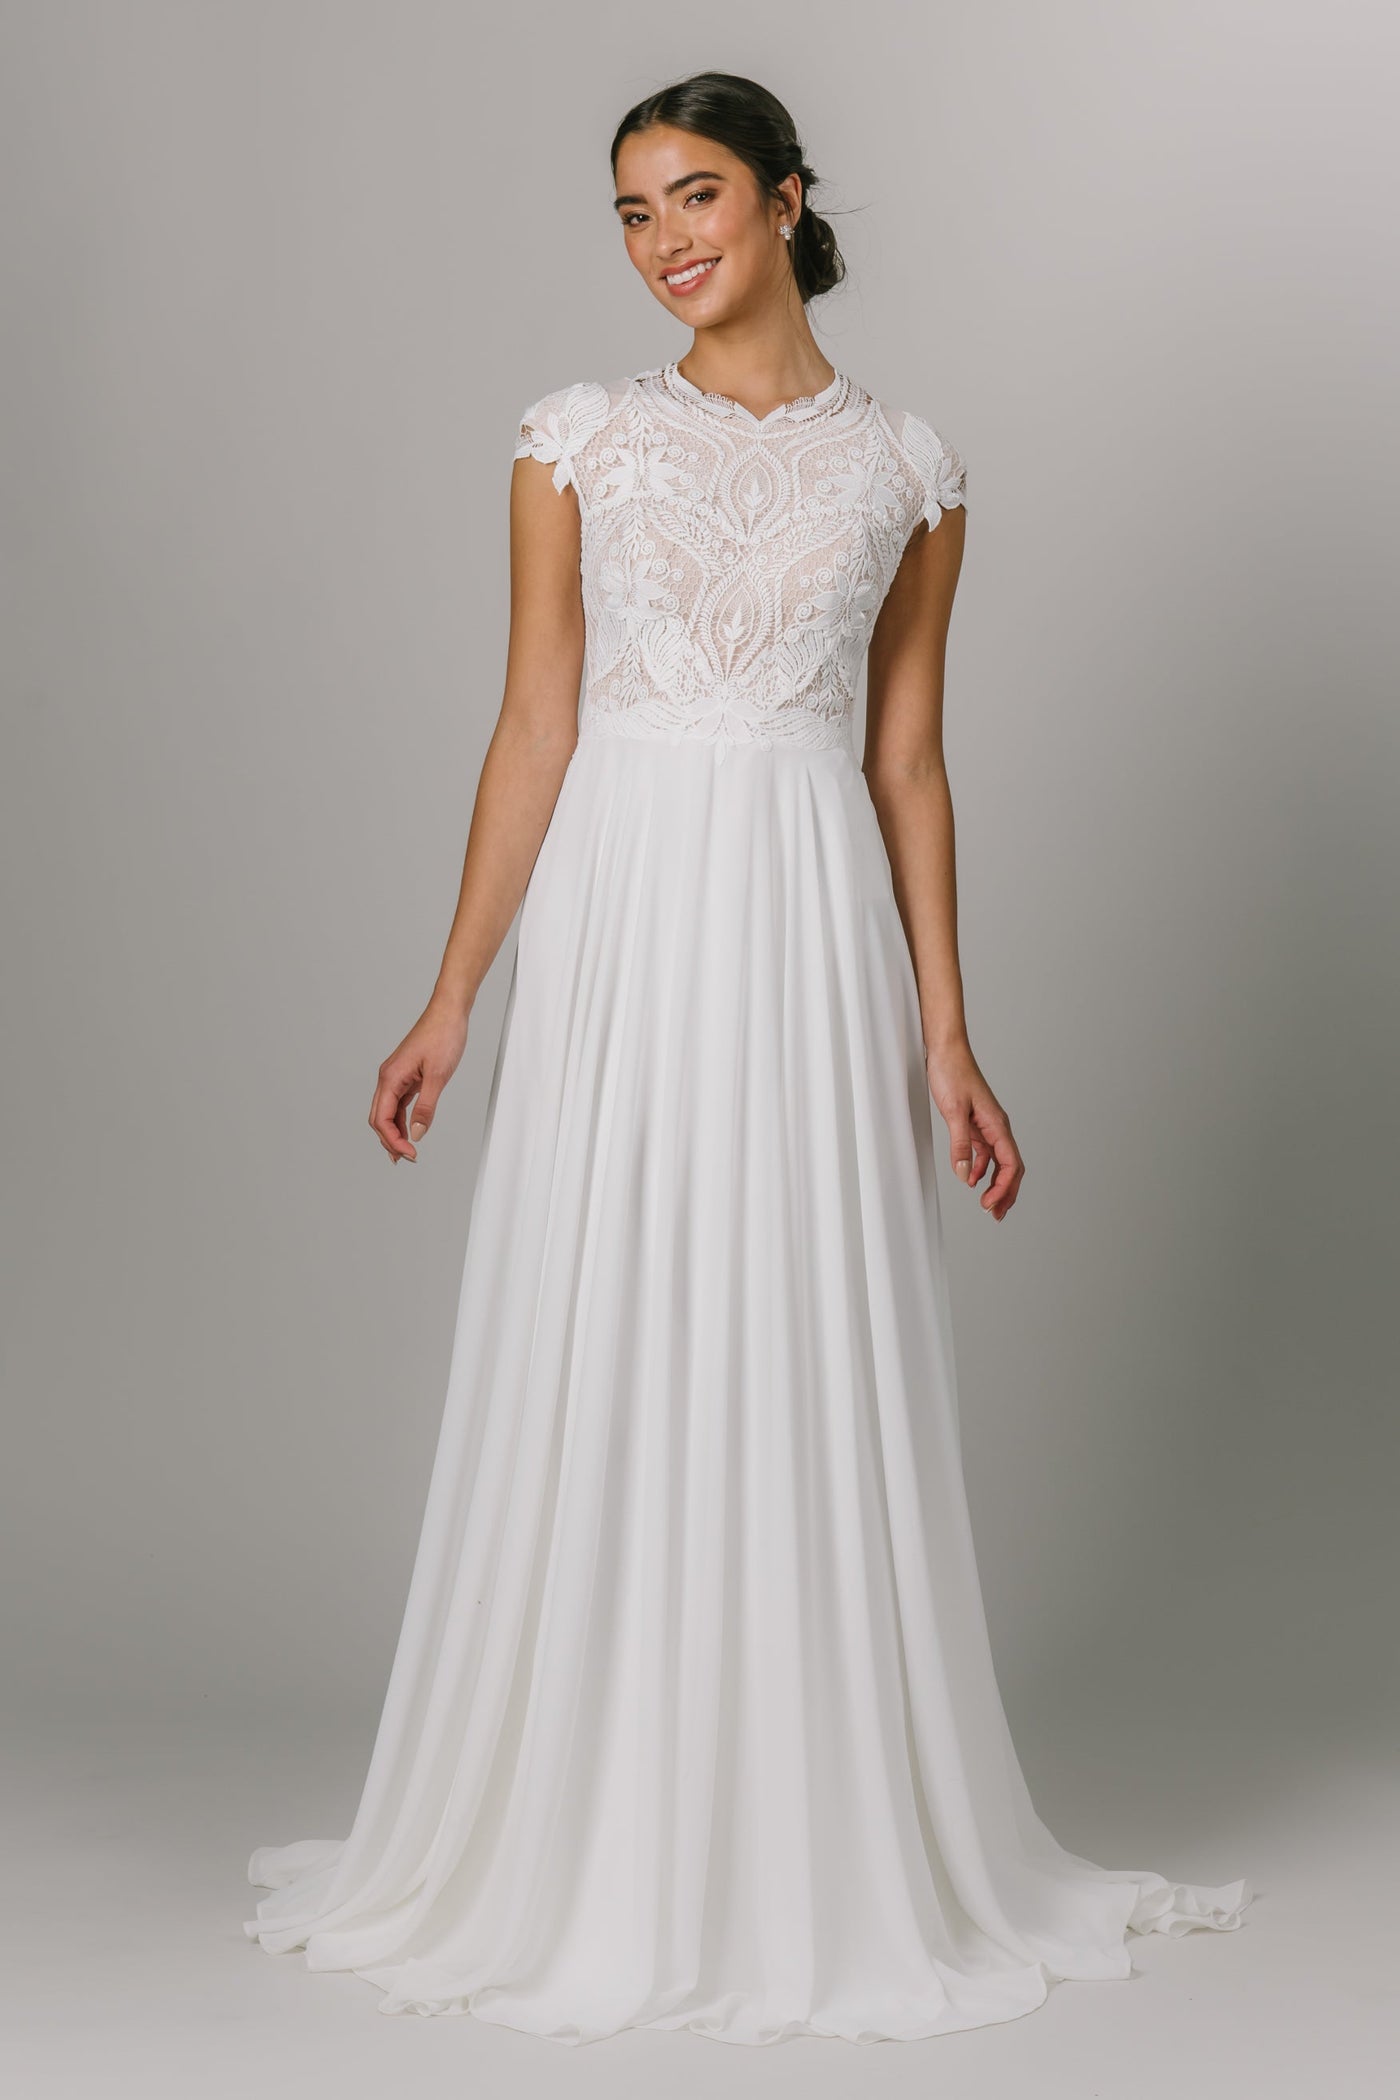 This Modest Wedding Dress features short sleeves, a unique neck line and lace bodice. - Modest Wedding Dresses - Modest Clothing - Modest Dresses 